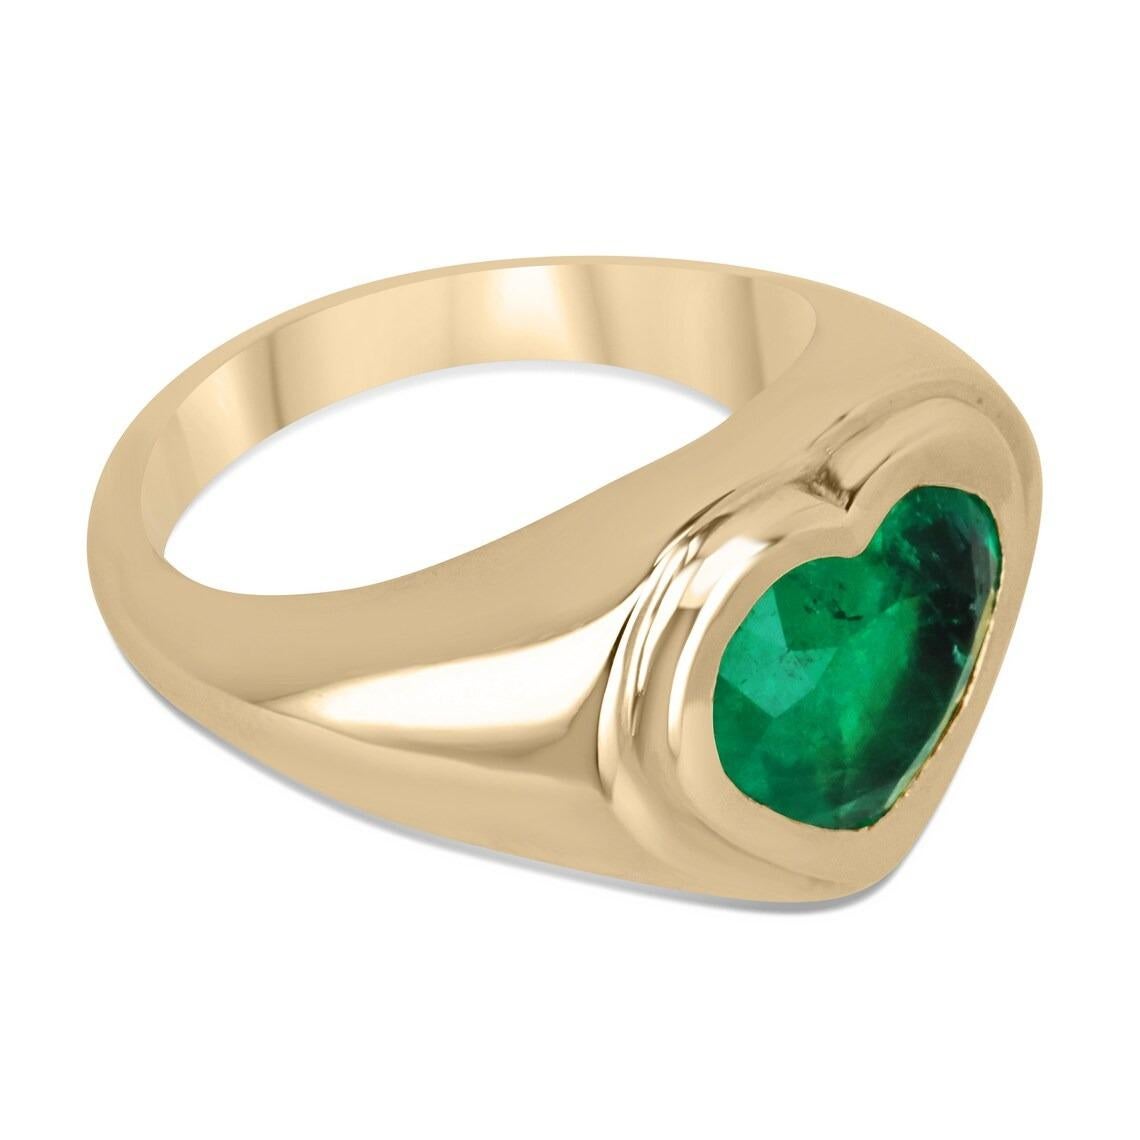 This exquisite ring boasts a fine quality 3.35-carat natural Colombian emerald in a heart cut, a rare and remarkable gem that is sure to turn heads. The emerald has a vivid dark rich green color and excellent luster of AAA quality, making it a truly